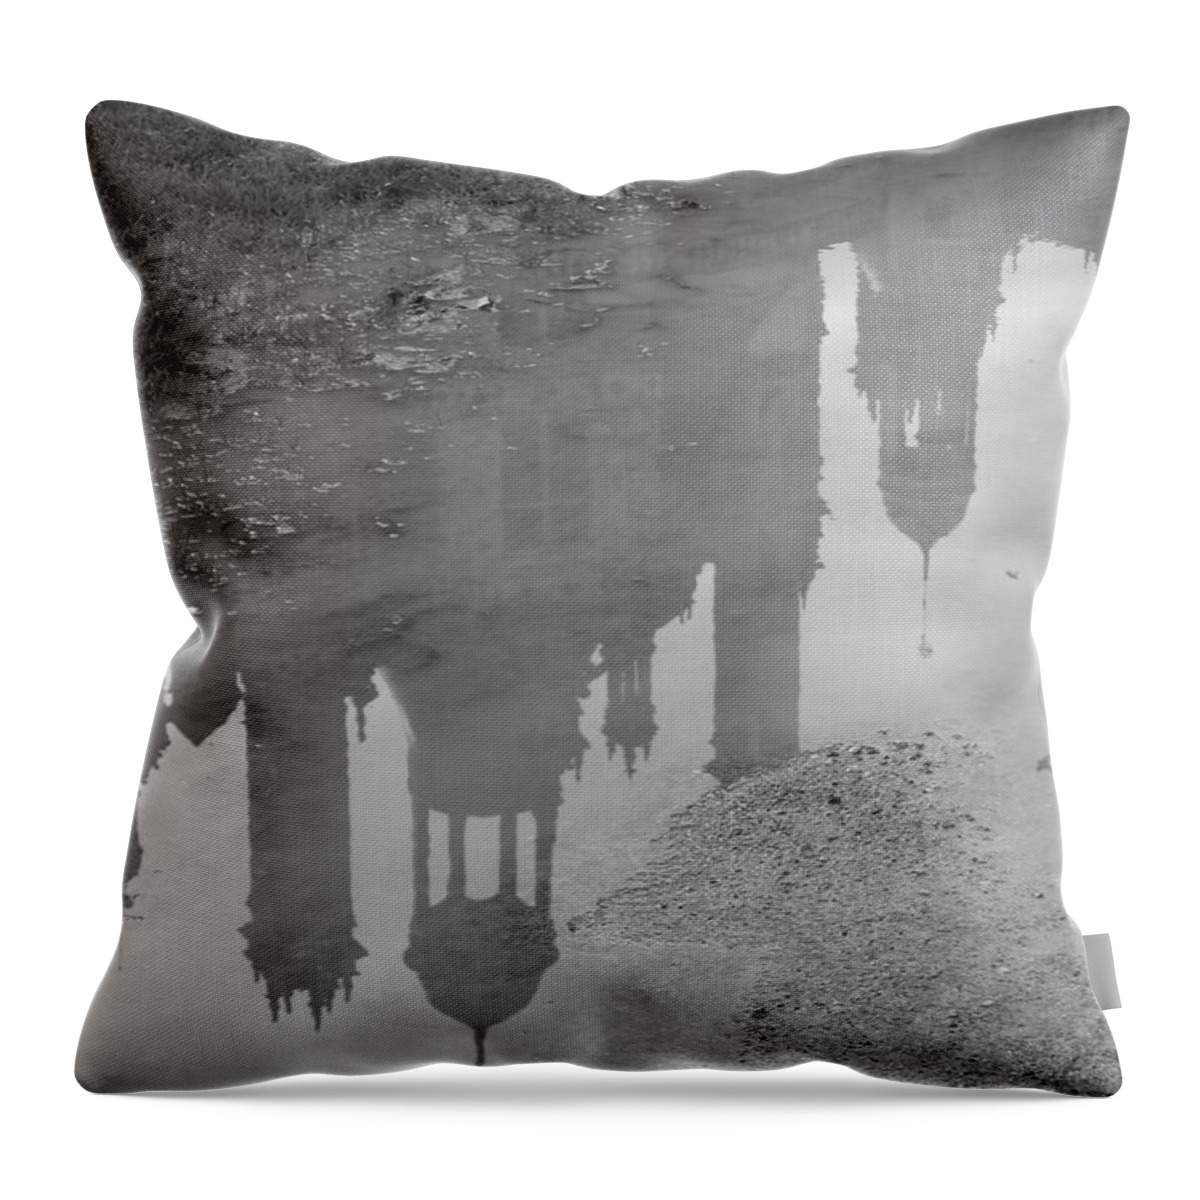 Chateau Chambord Throw Pillow featuring the photograph Chateau Chambord Reflection by HEVi FineArt